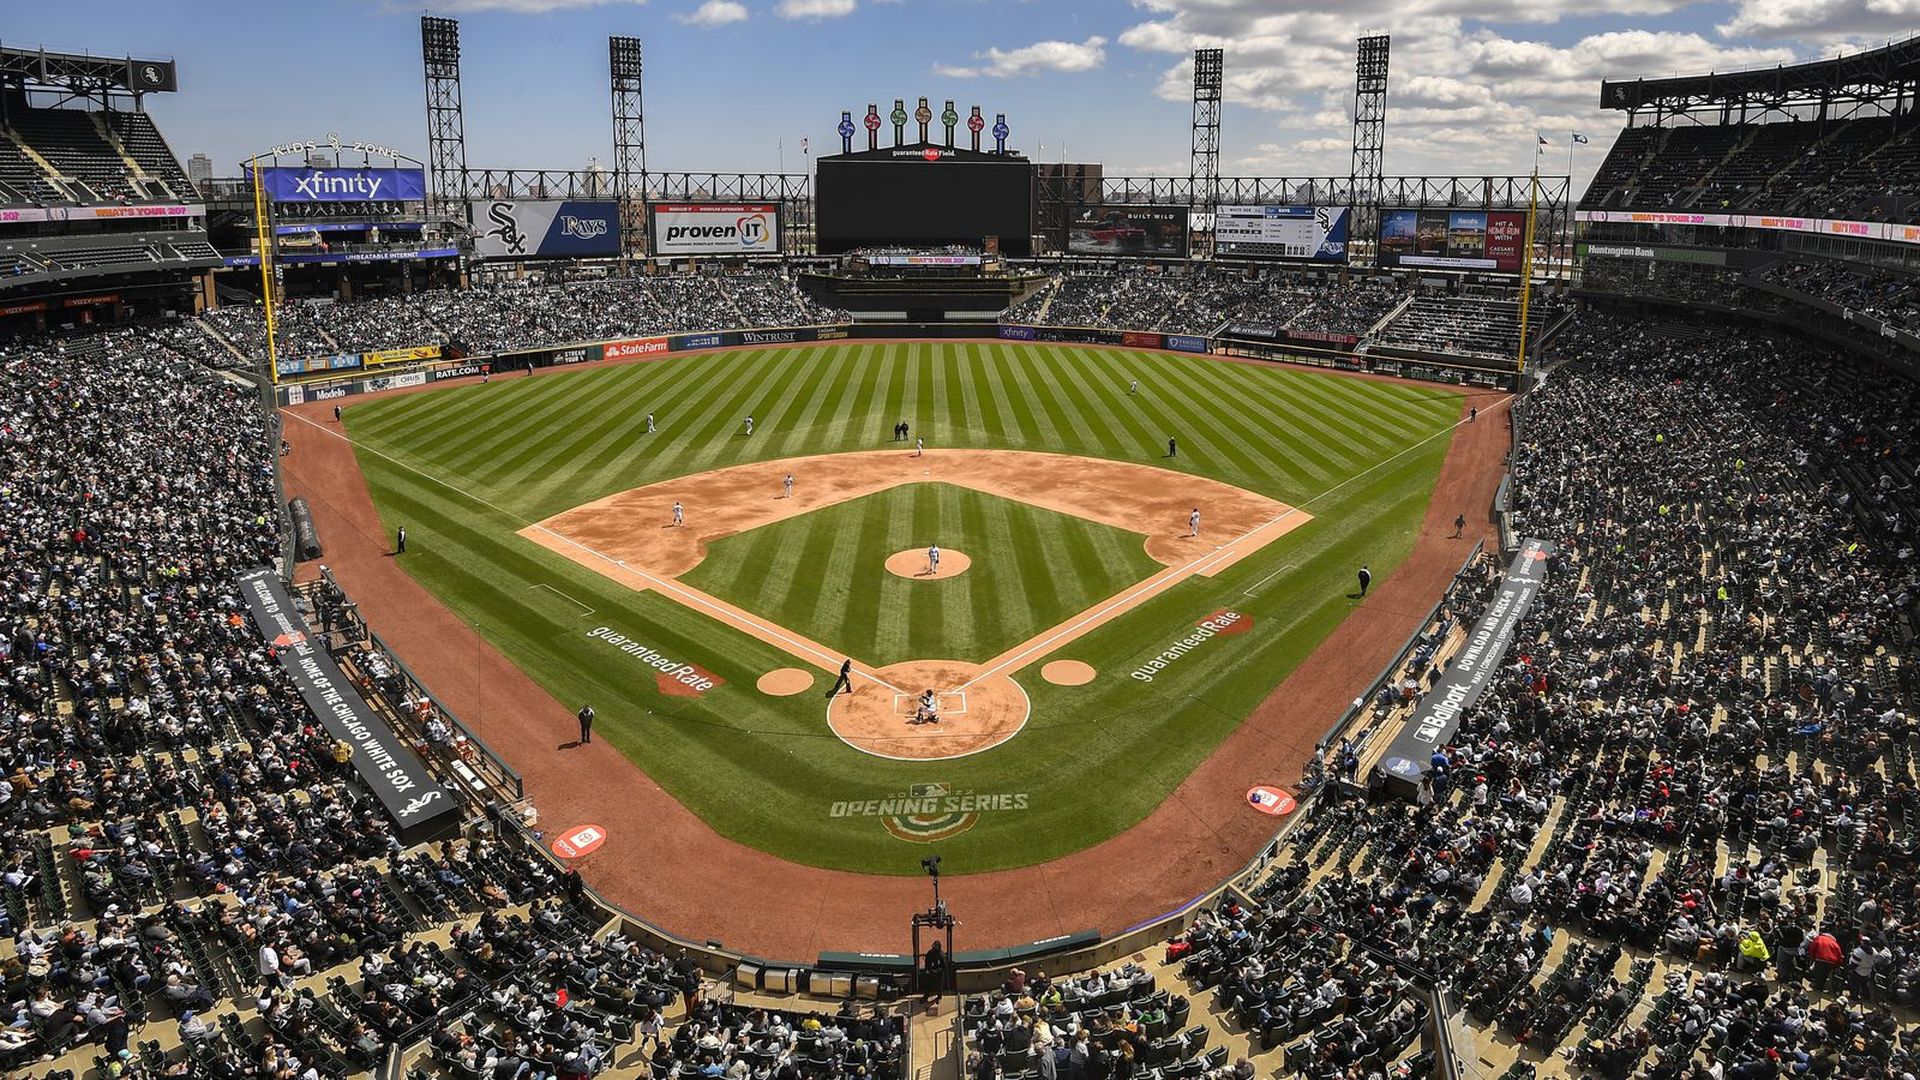 Guaranteed Rate Field, home of the Chicago White Sox